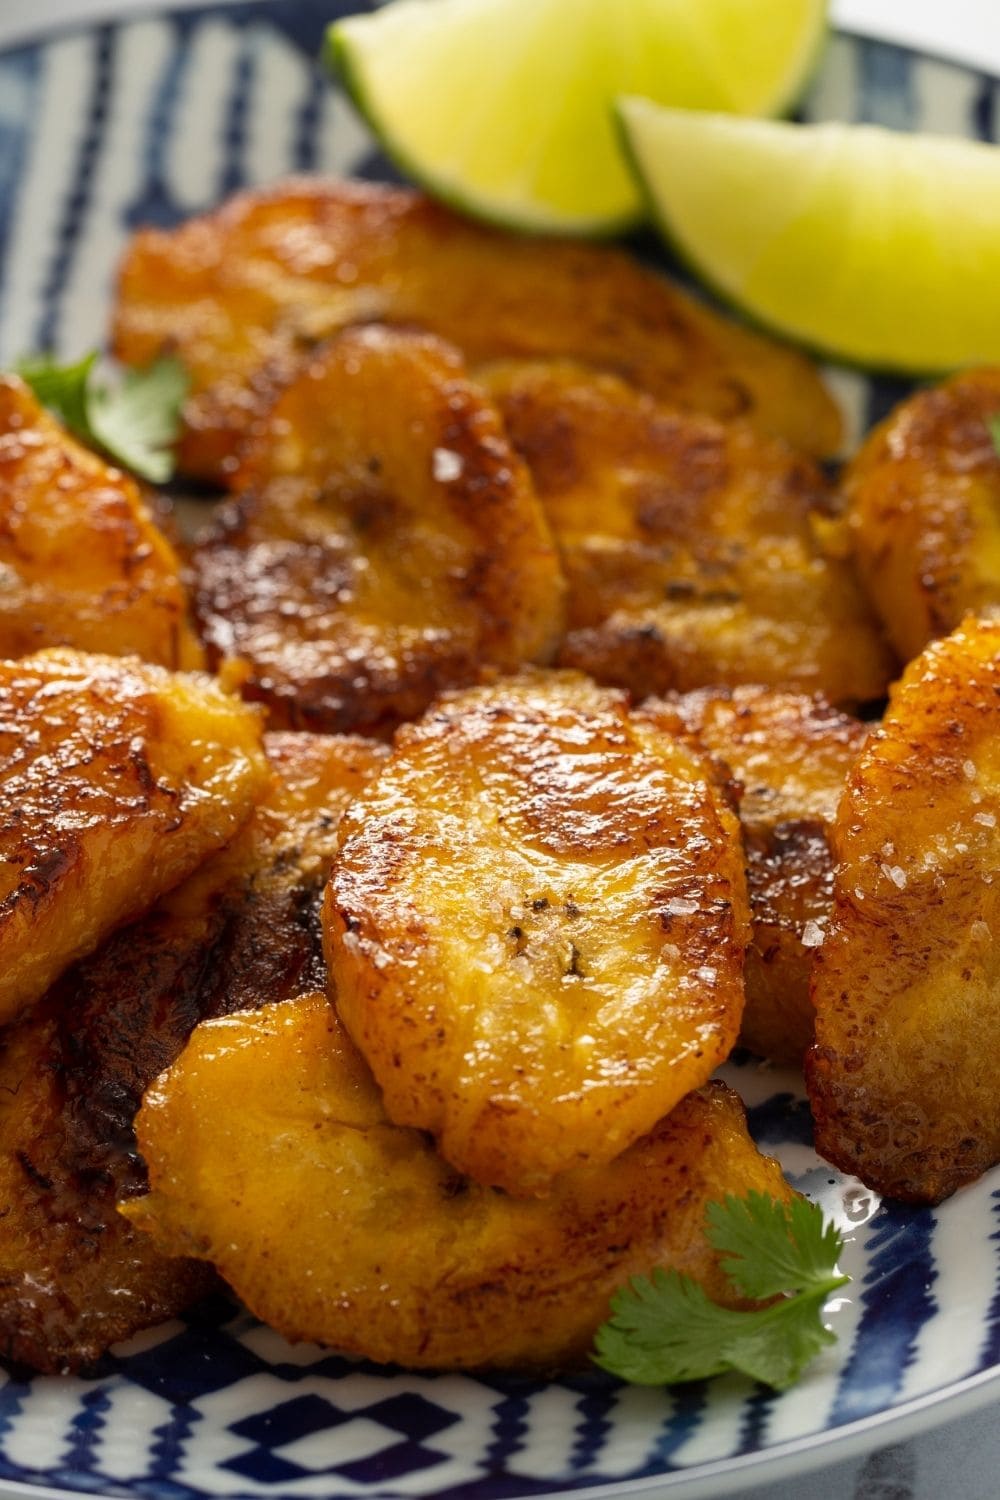 20 Plantain Recipes for a Taste of the Islands: featuring Caramelized Fried Plantains with Lime